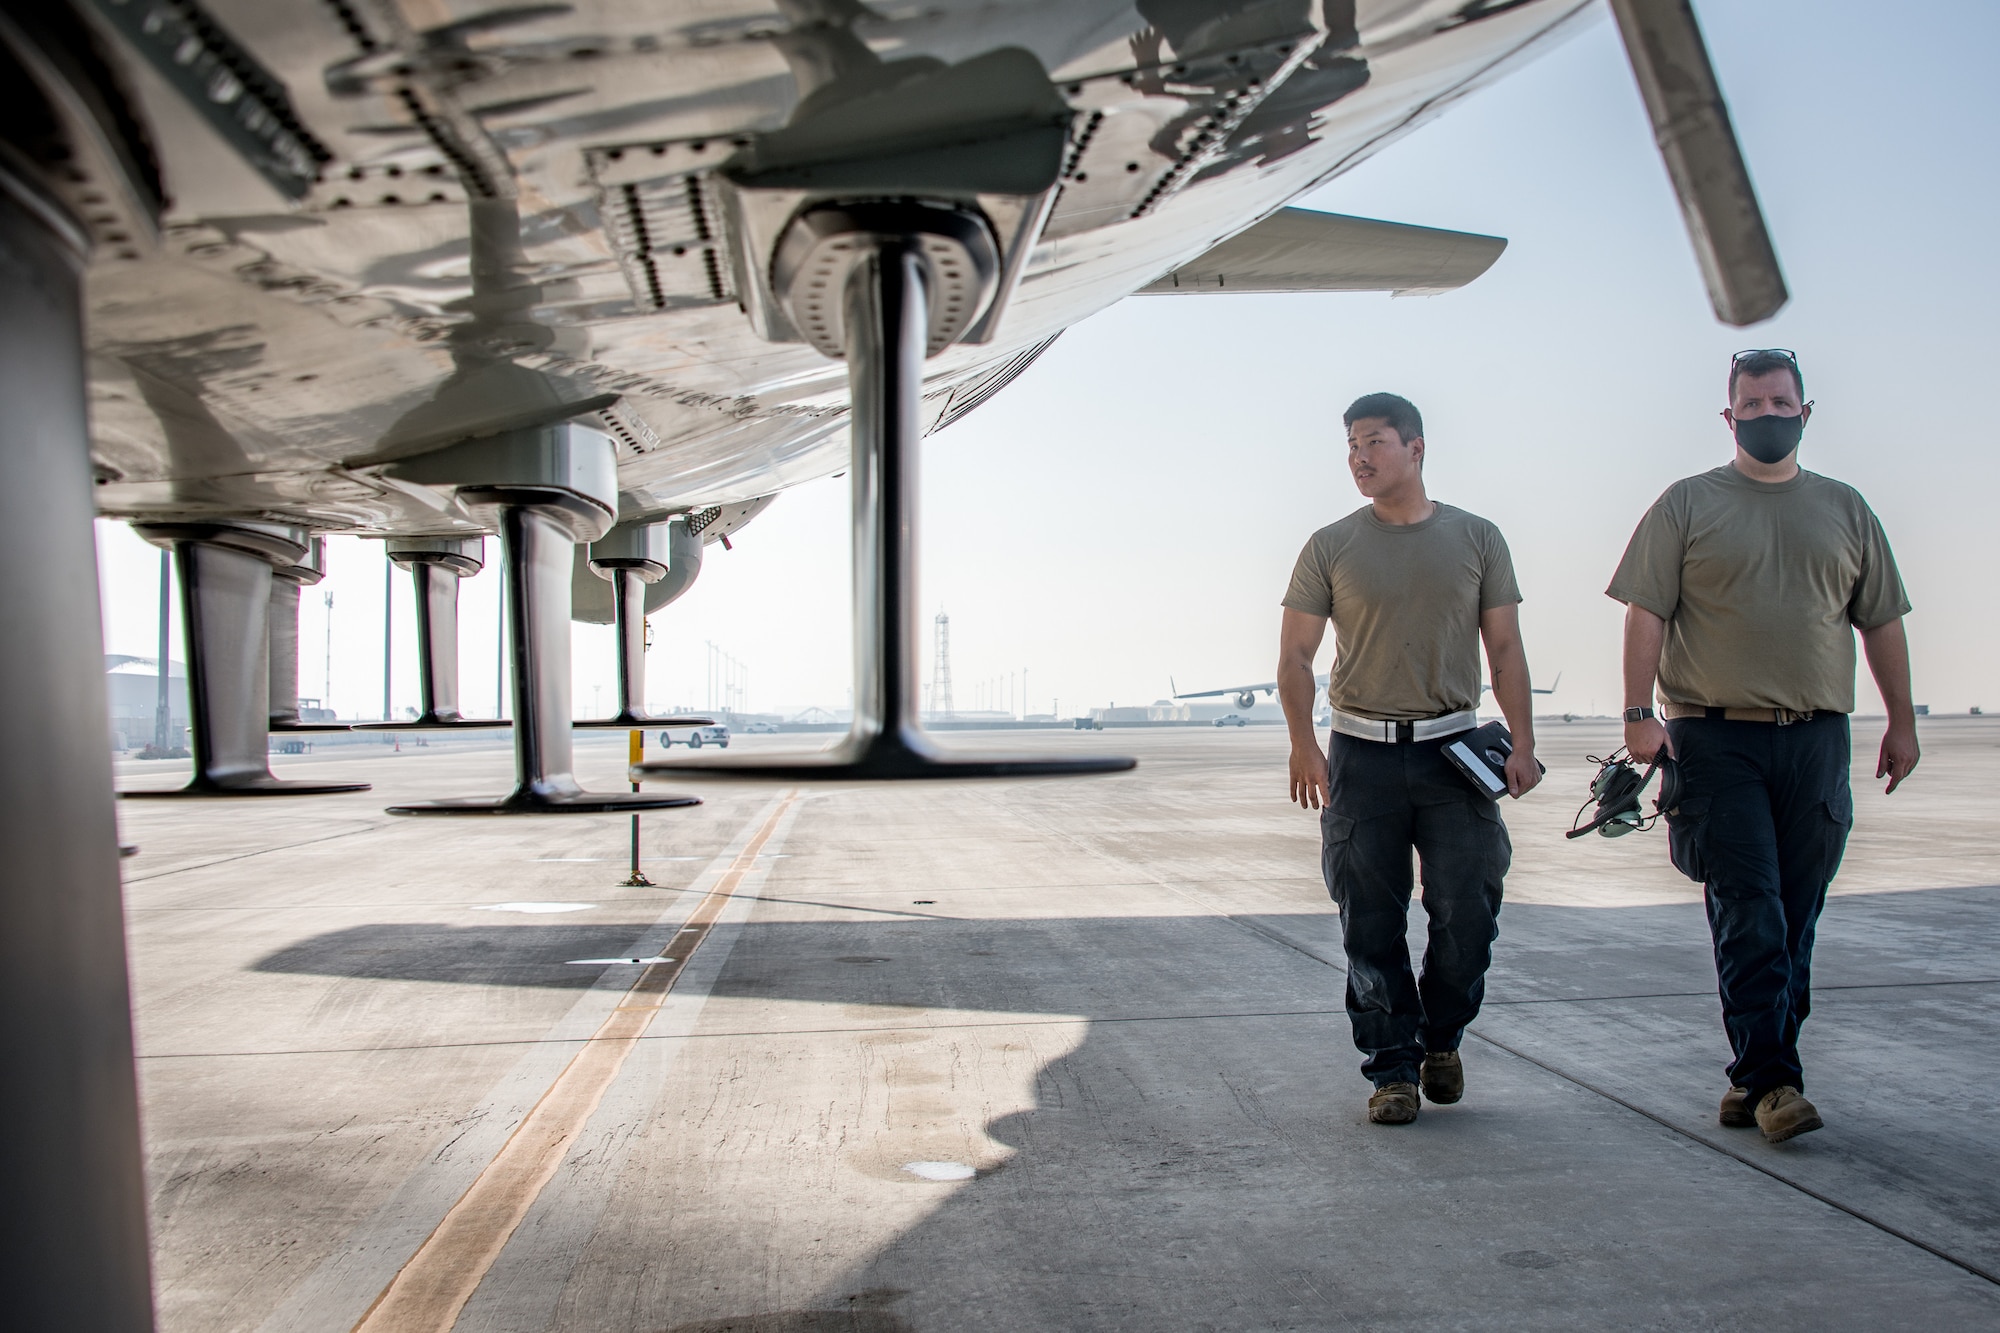 two men walk by the tail of an aircraft